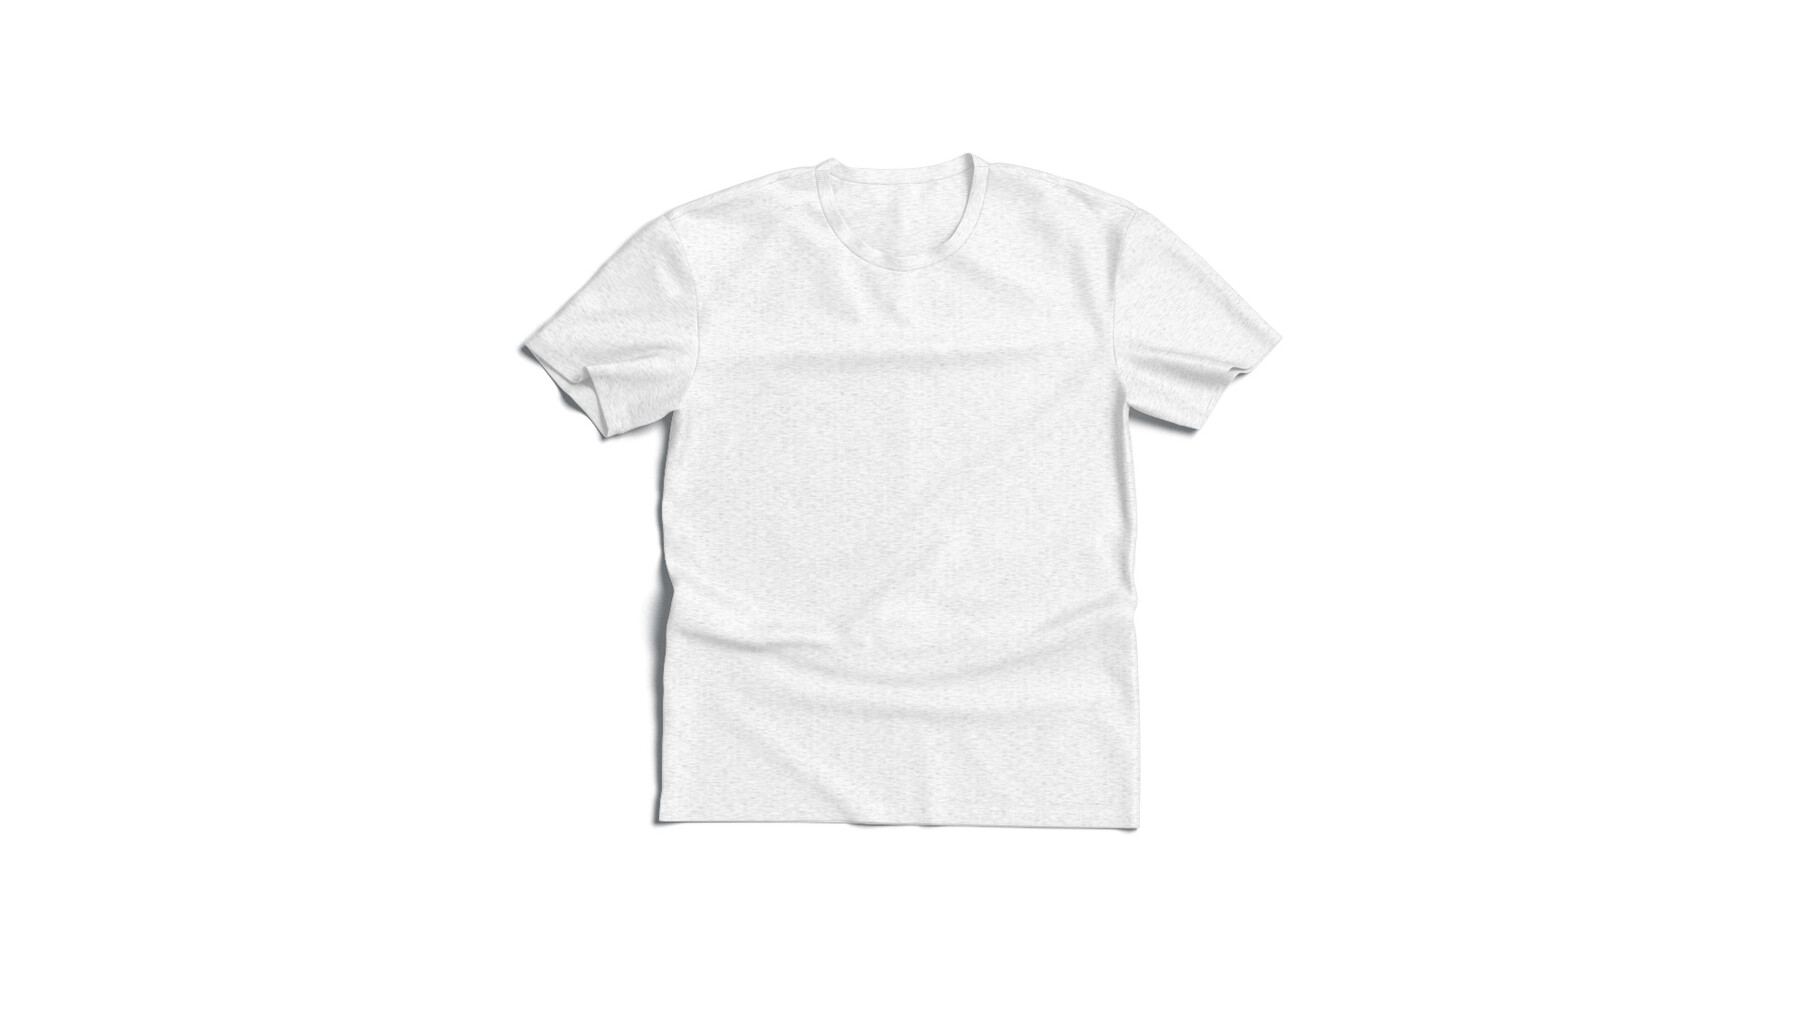 ArtStation - Flat Lay T-shirt front and back - wrinkled fabric tee ...